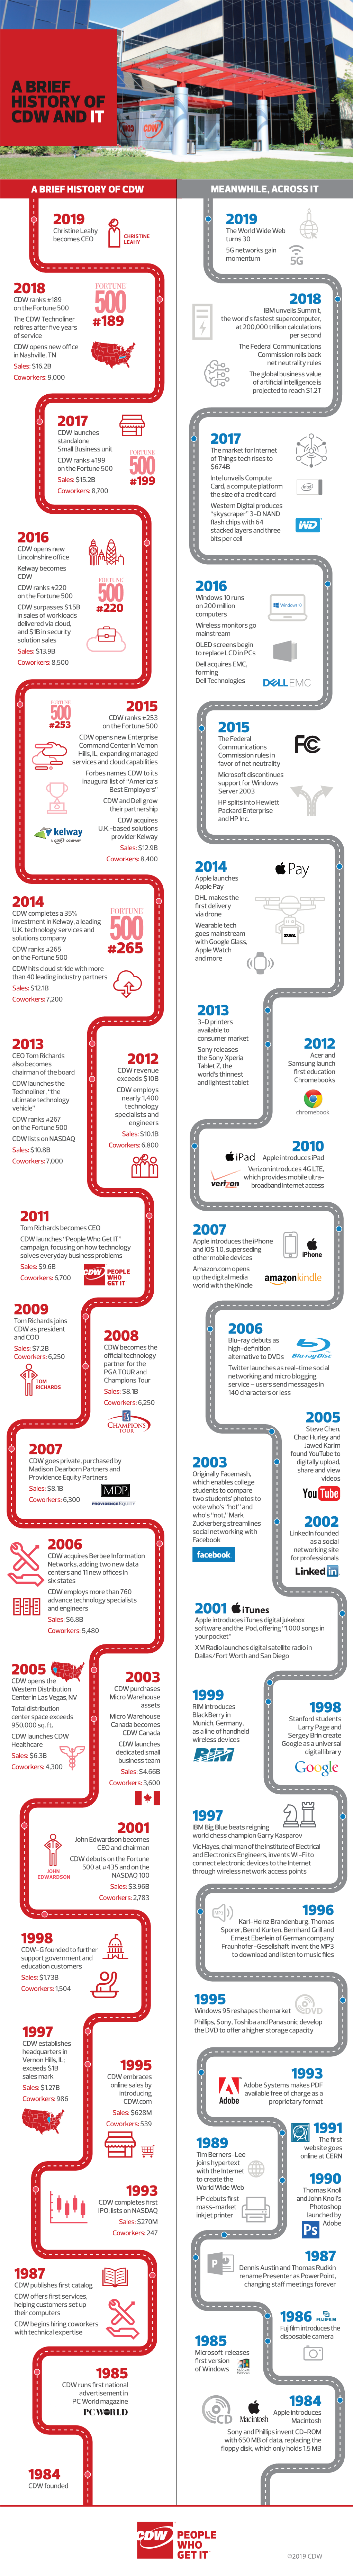 A Brief History of Cdw Andit